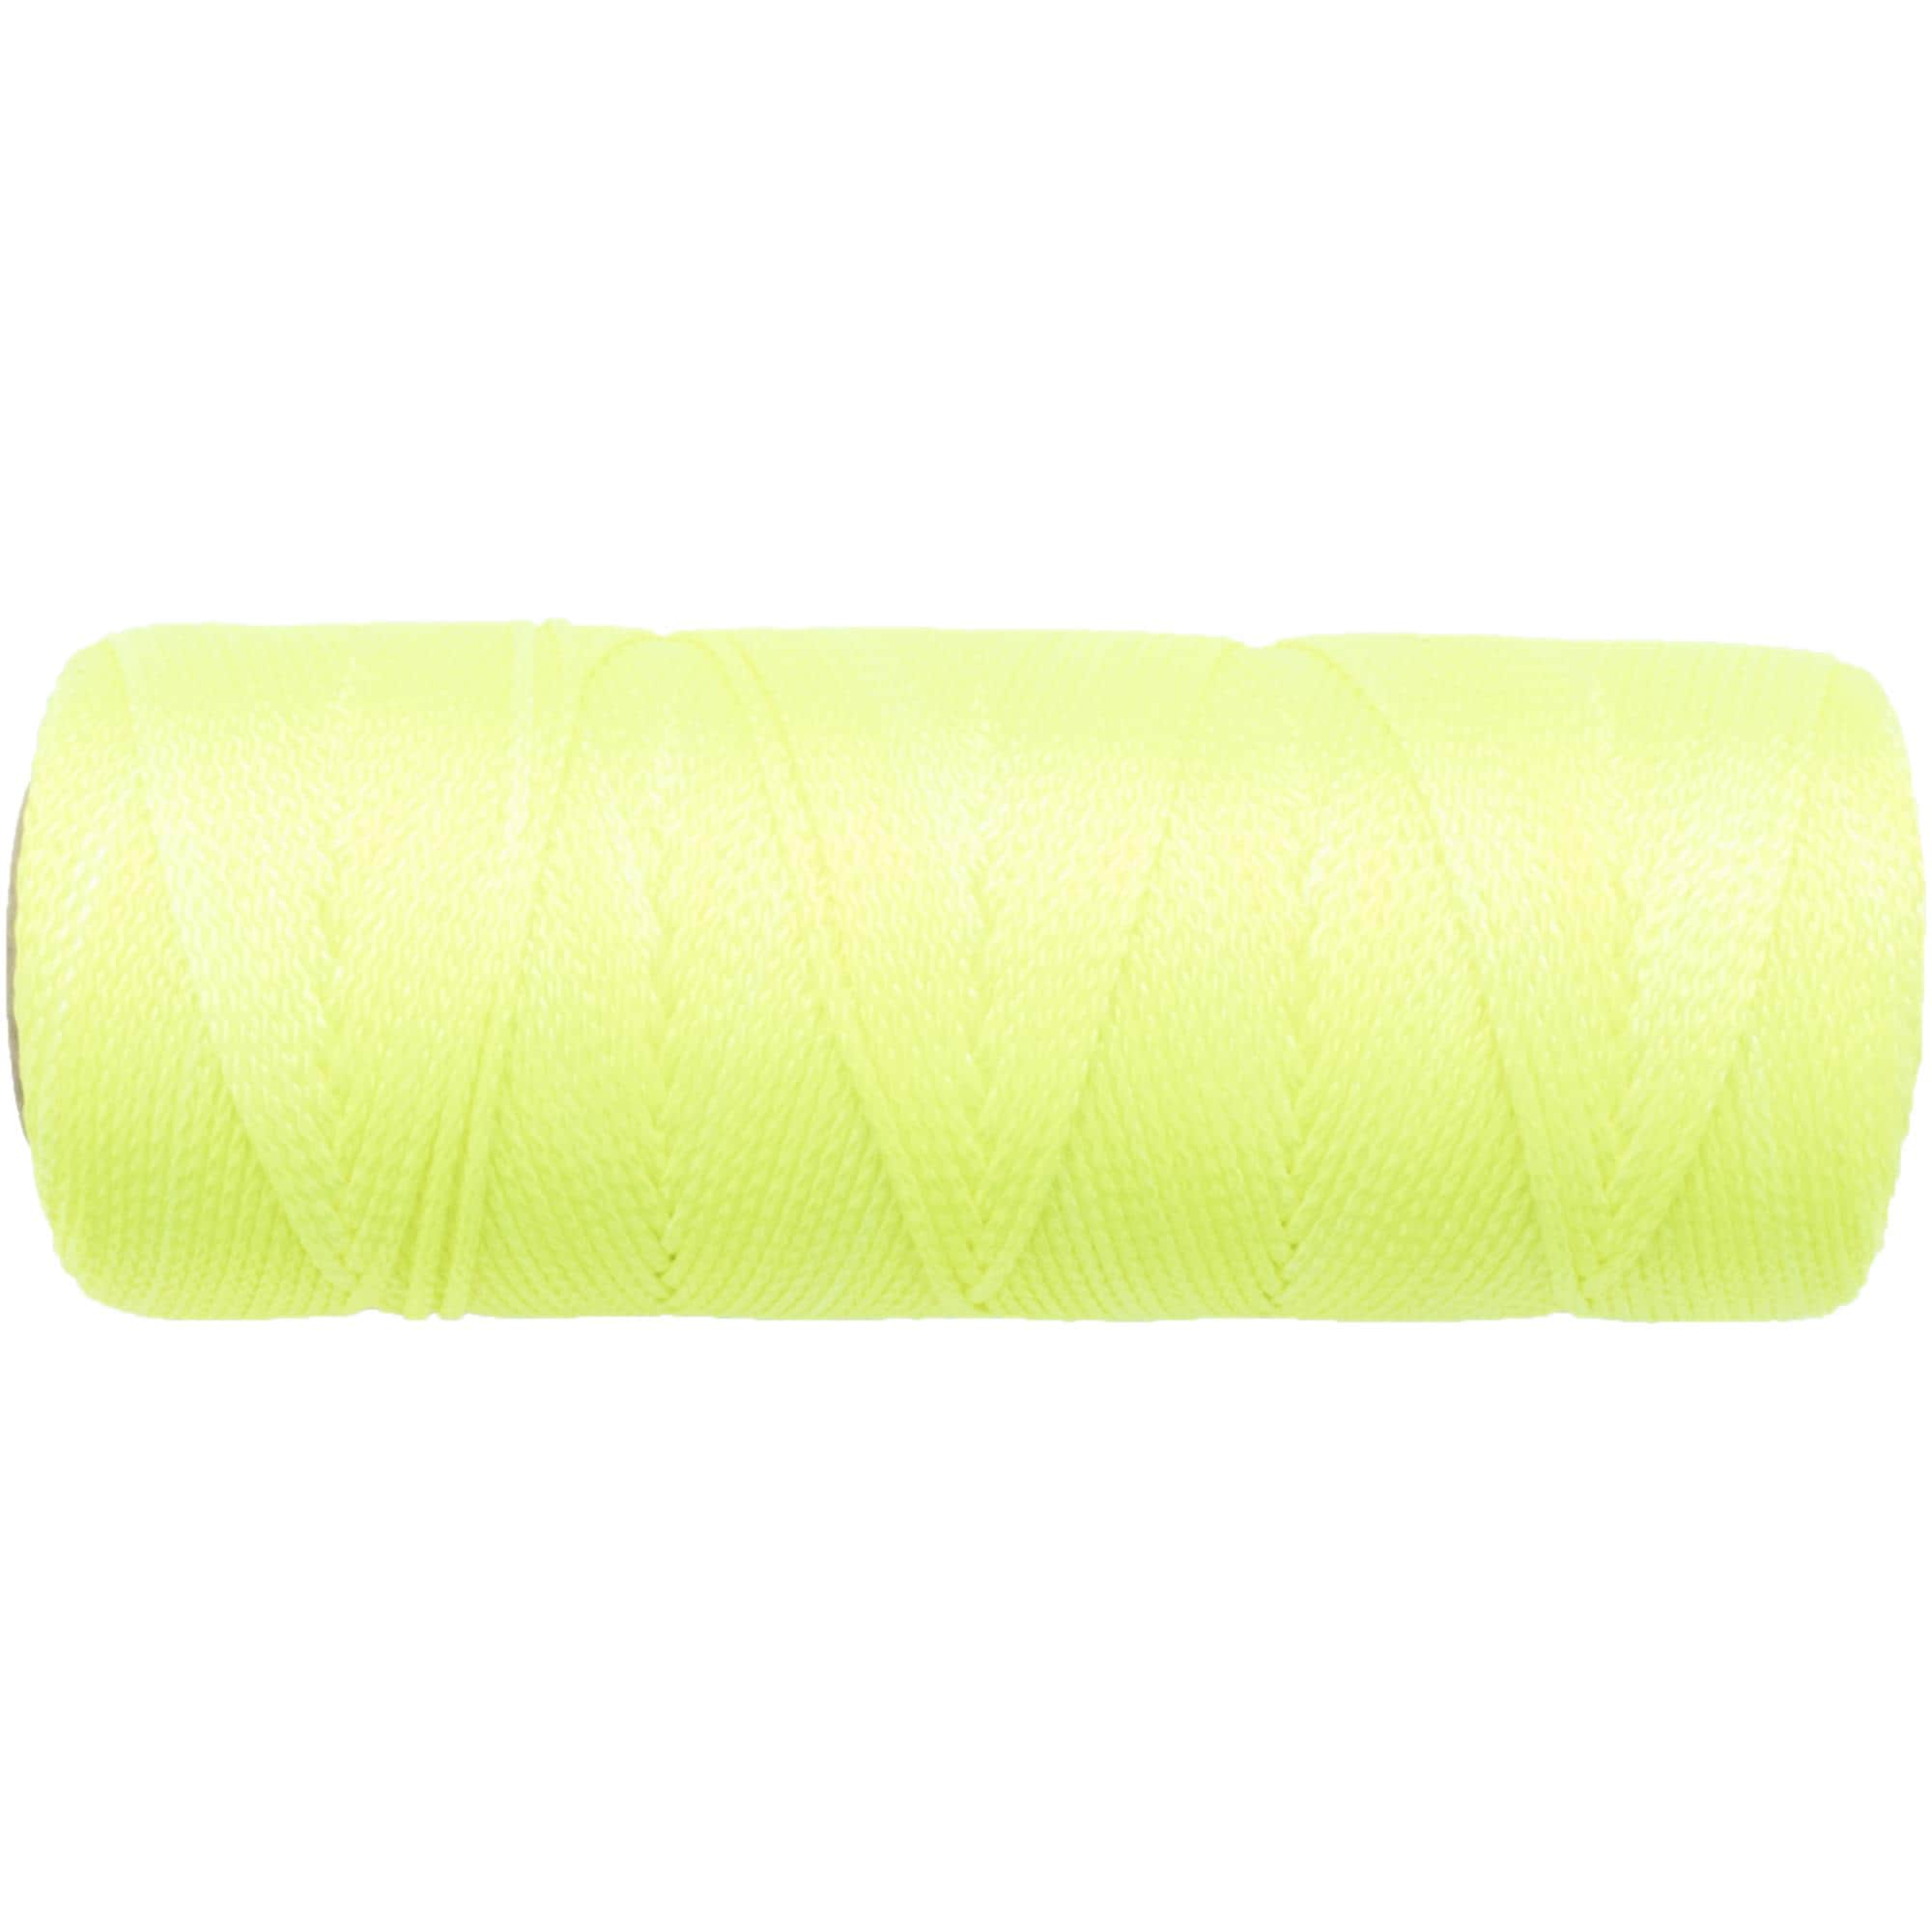 Marshalltown 500-ft Yellow Nylon Mason Line String in the String & Twine  department at